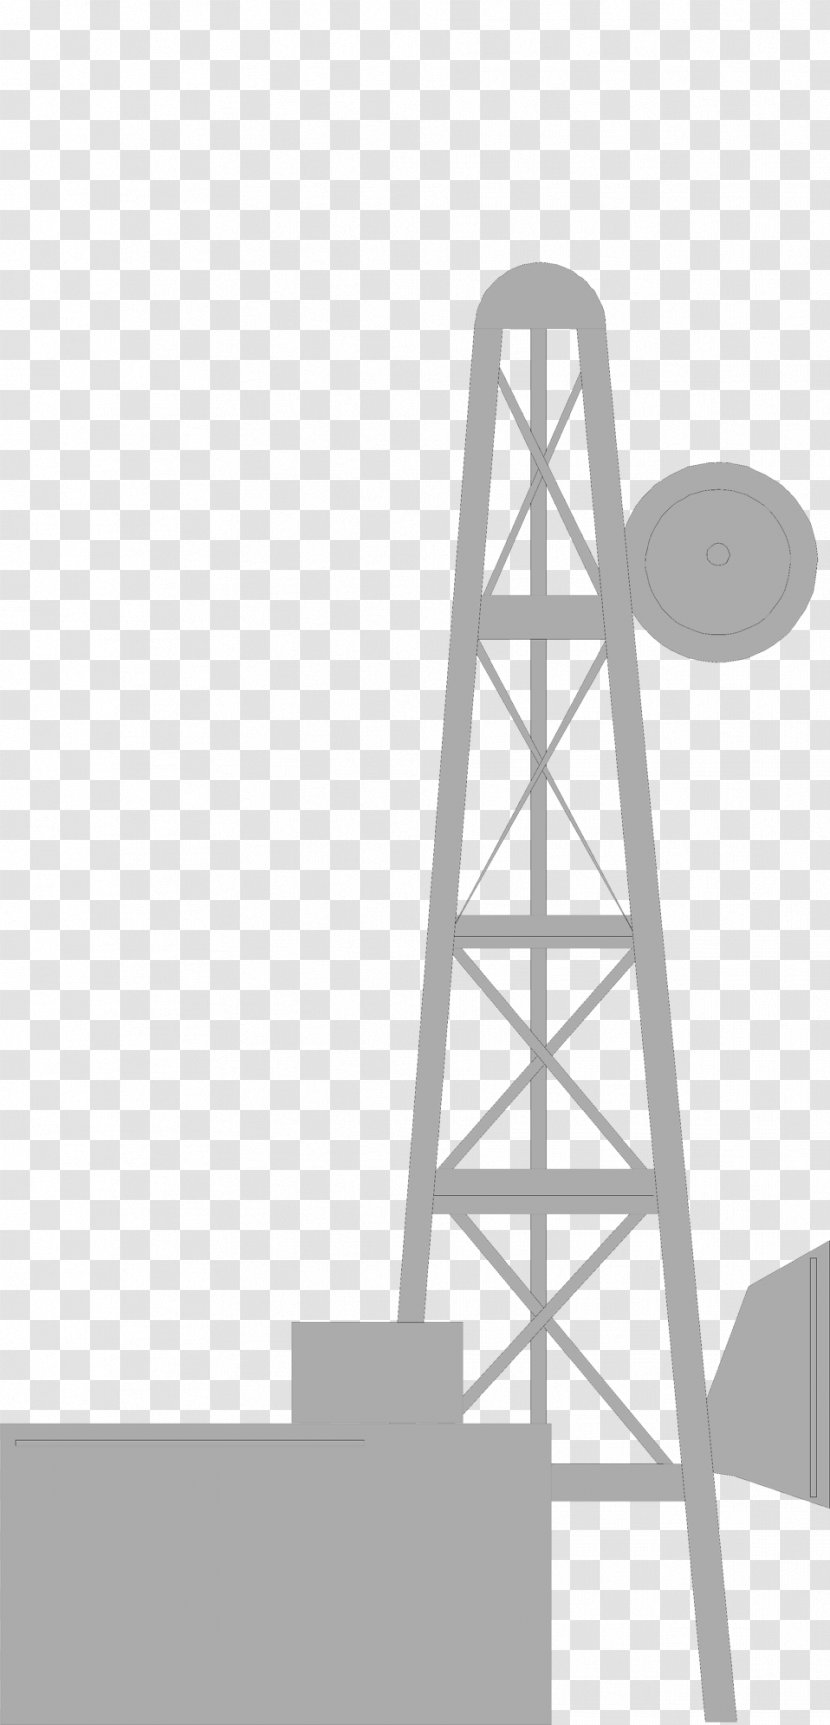 Telecommunications Tower Microwave Antenna Transmission Clip Art - Monochrome Photography Transparent PNG